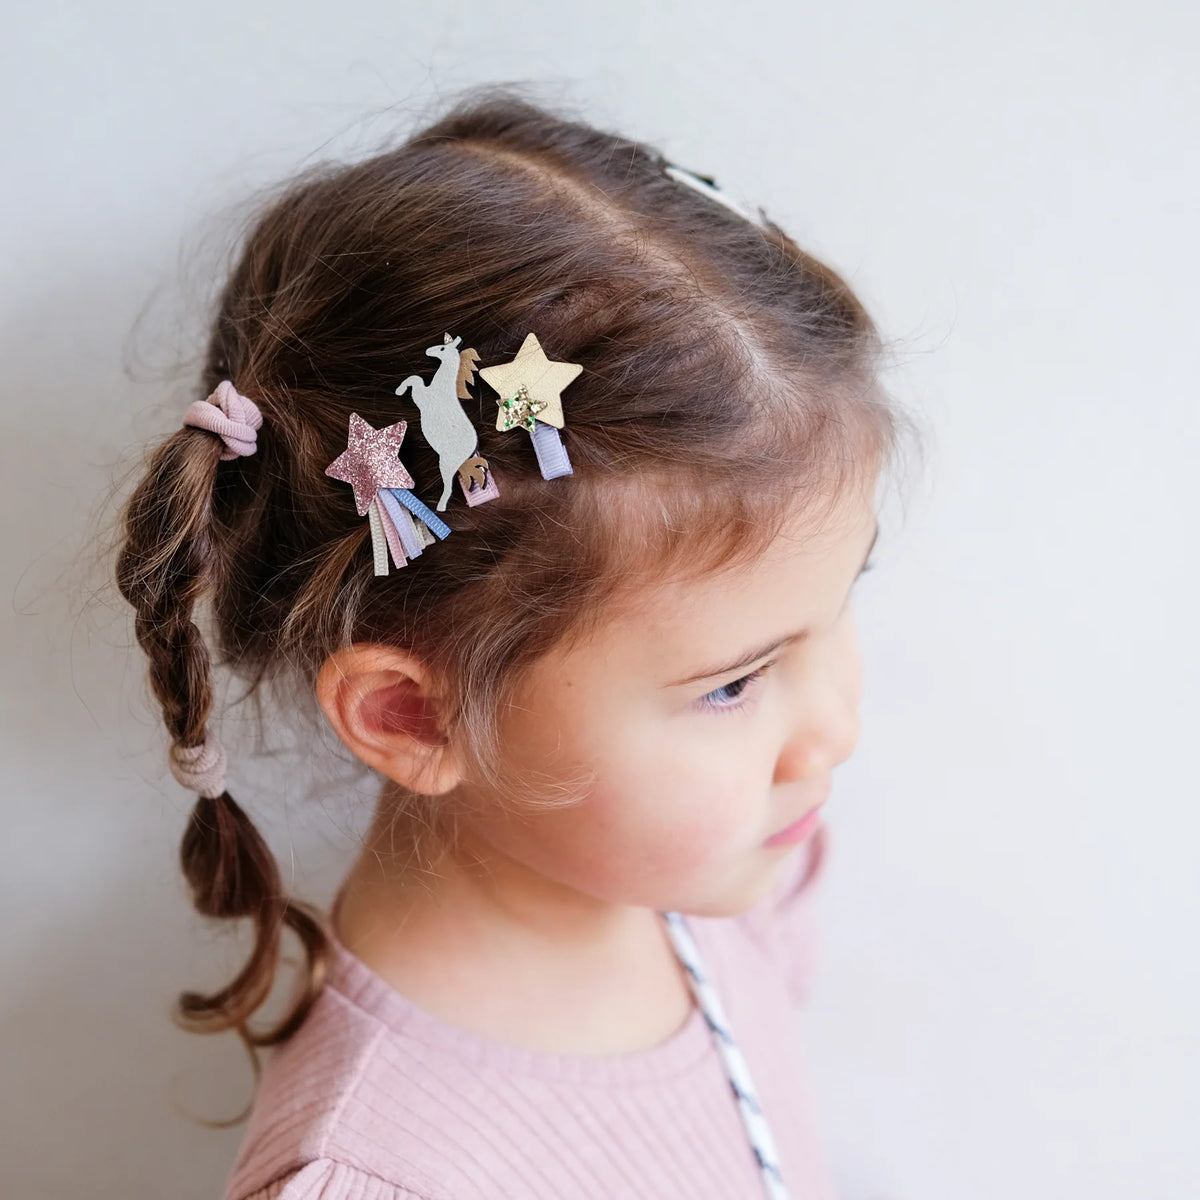 Unicorn and Star Hair Clips - Set of 2